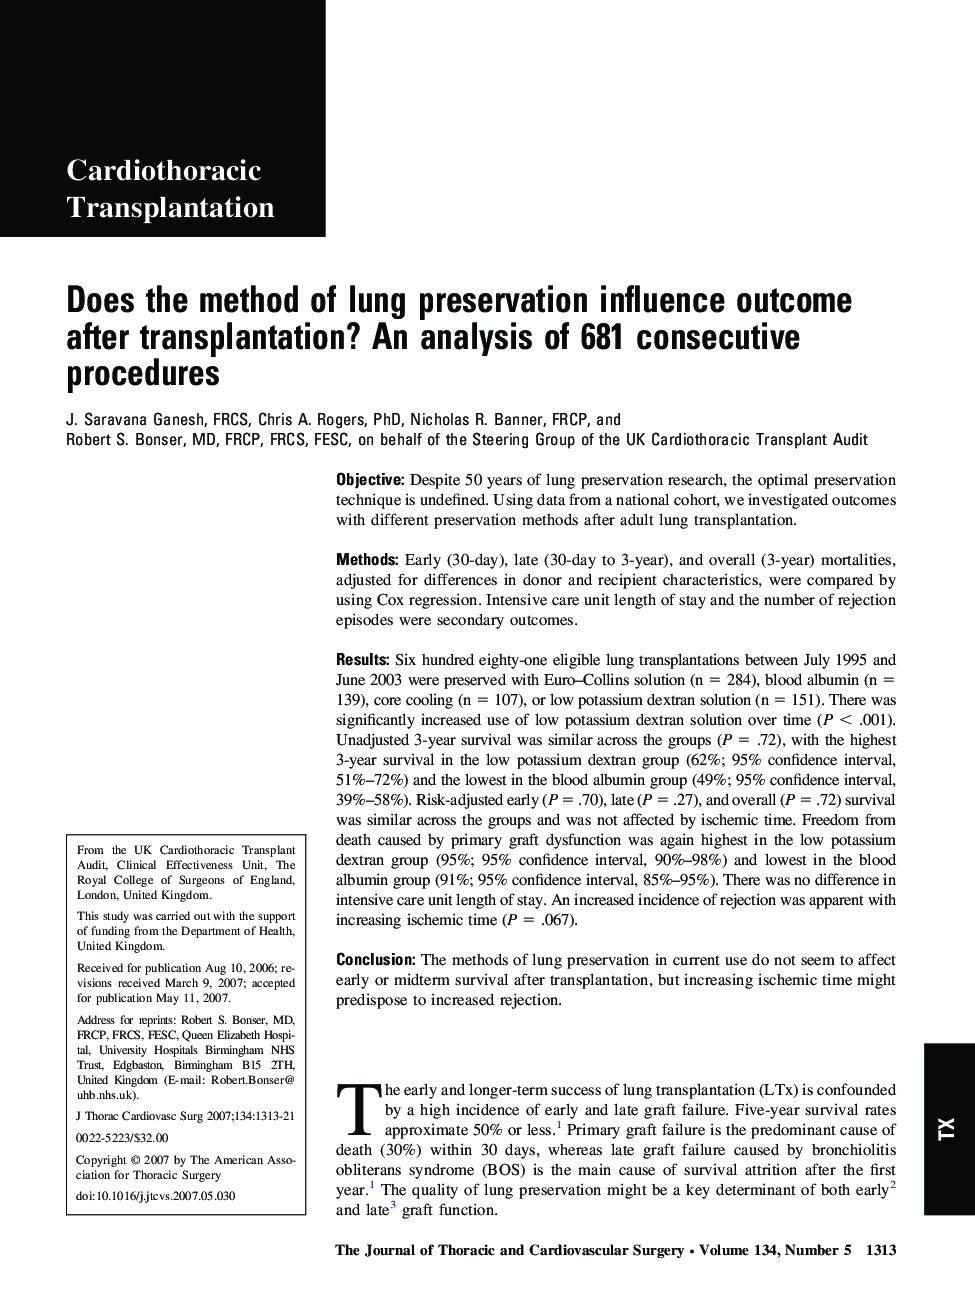 Does the method of lung preservation influence outcome after transplantation? An analysis of 681 consecutive procedures 